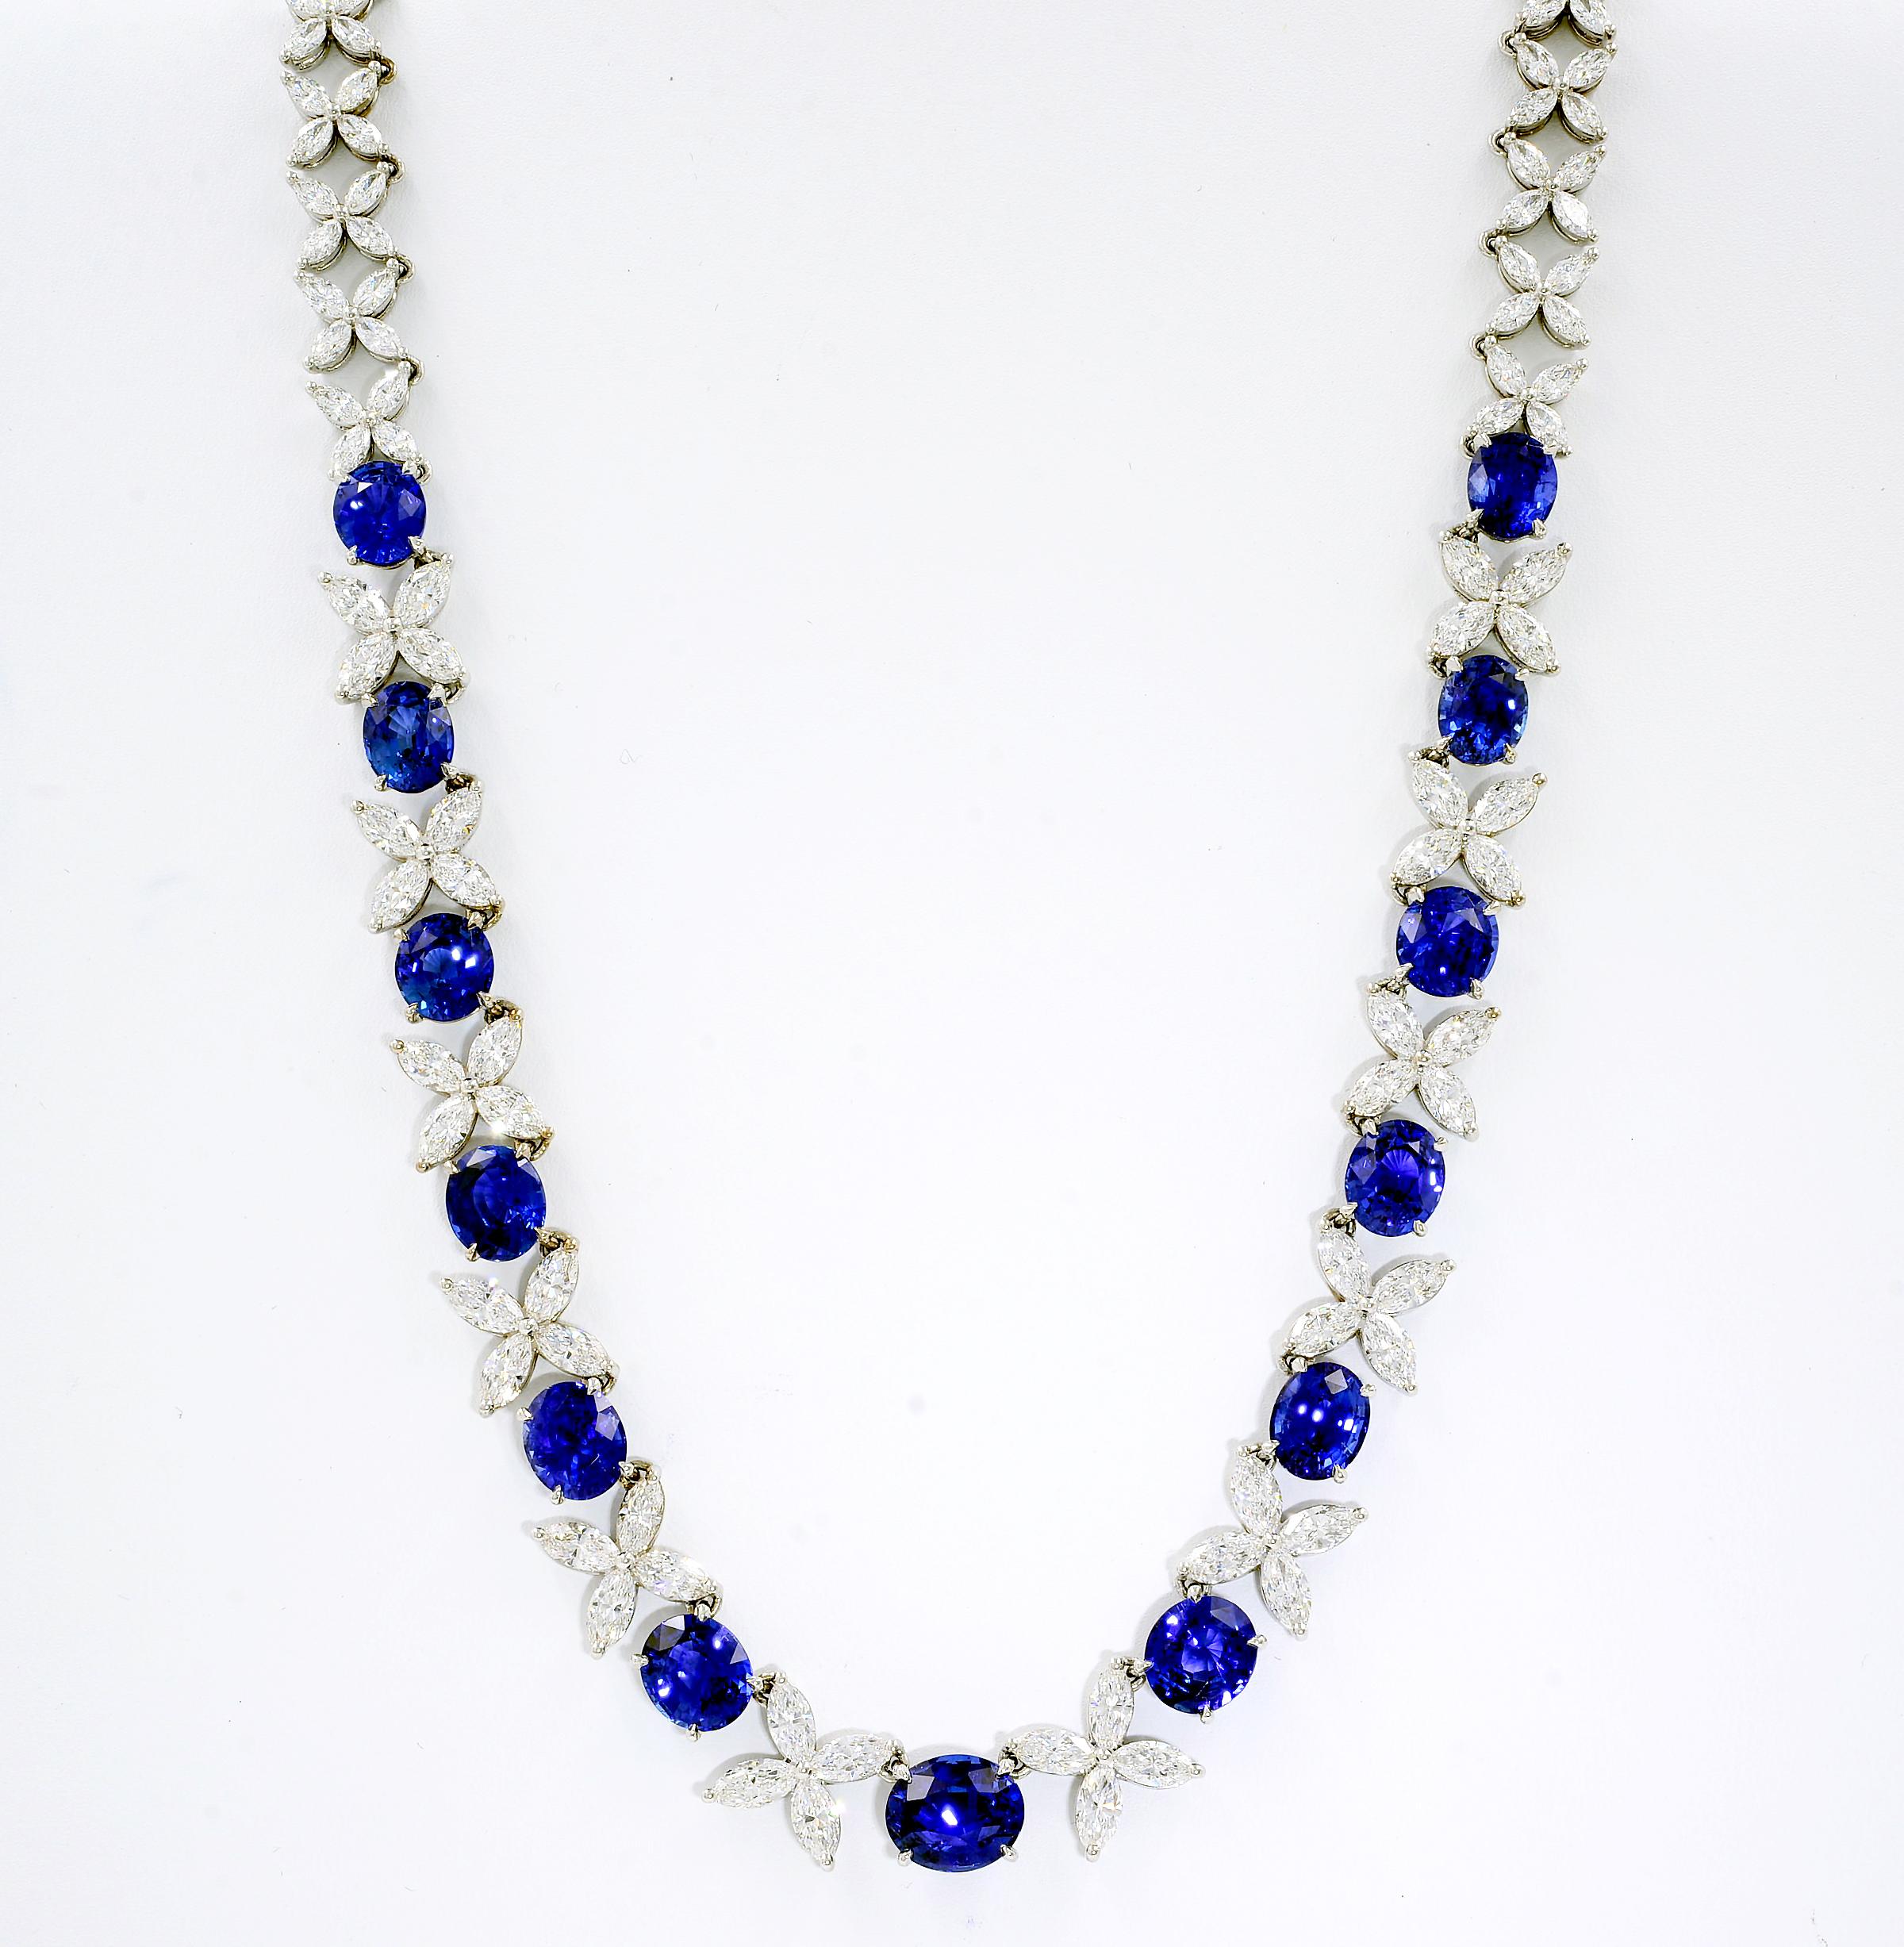 Natural Sapphire GIA Cert Diamonds Gold Riviere Necklace 18K White Gold

Stunning riviere necklace featuring thirteen oval cut sapphires and 140 marquise cut diamonds. Oval sapphires are of an amazing royal blue color and are GIA certified (13